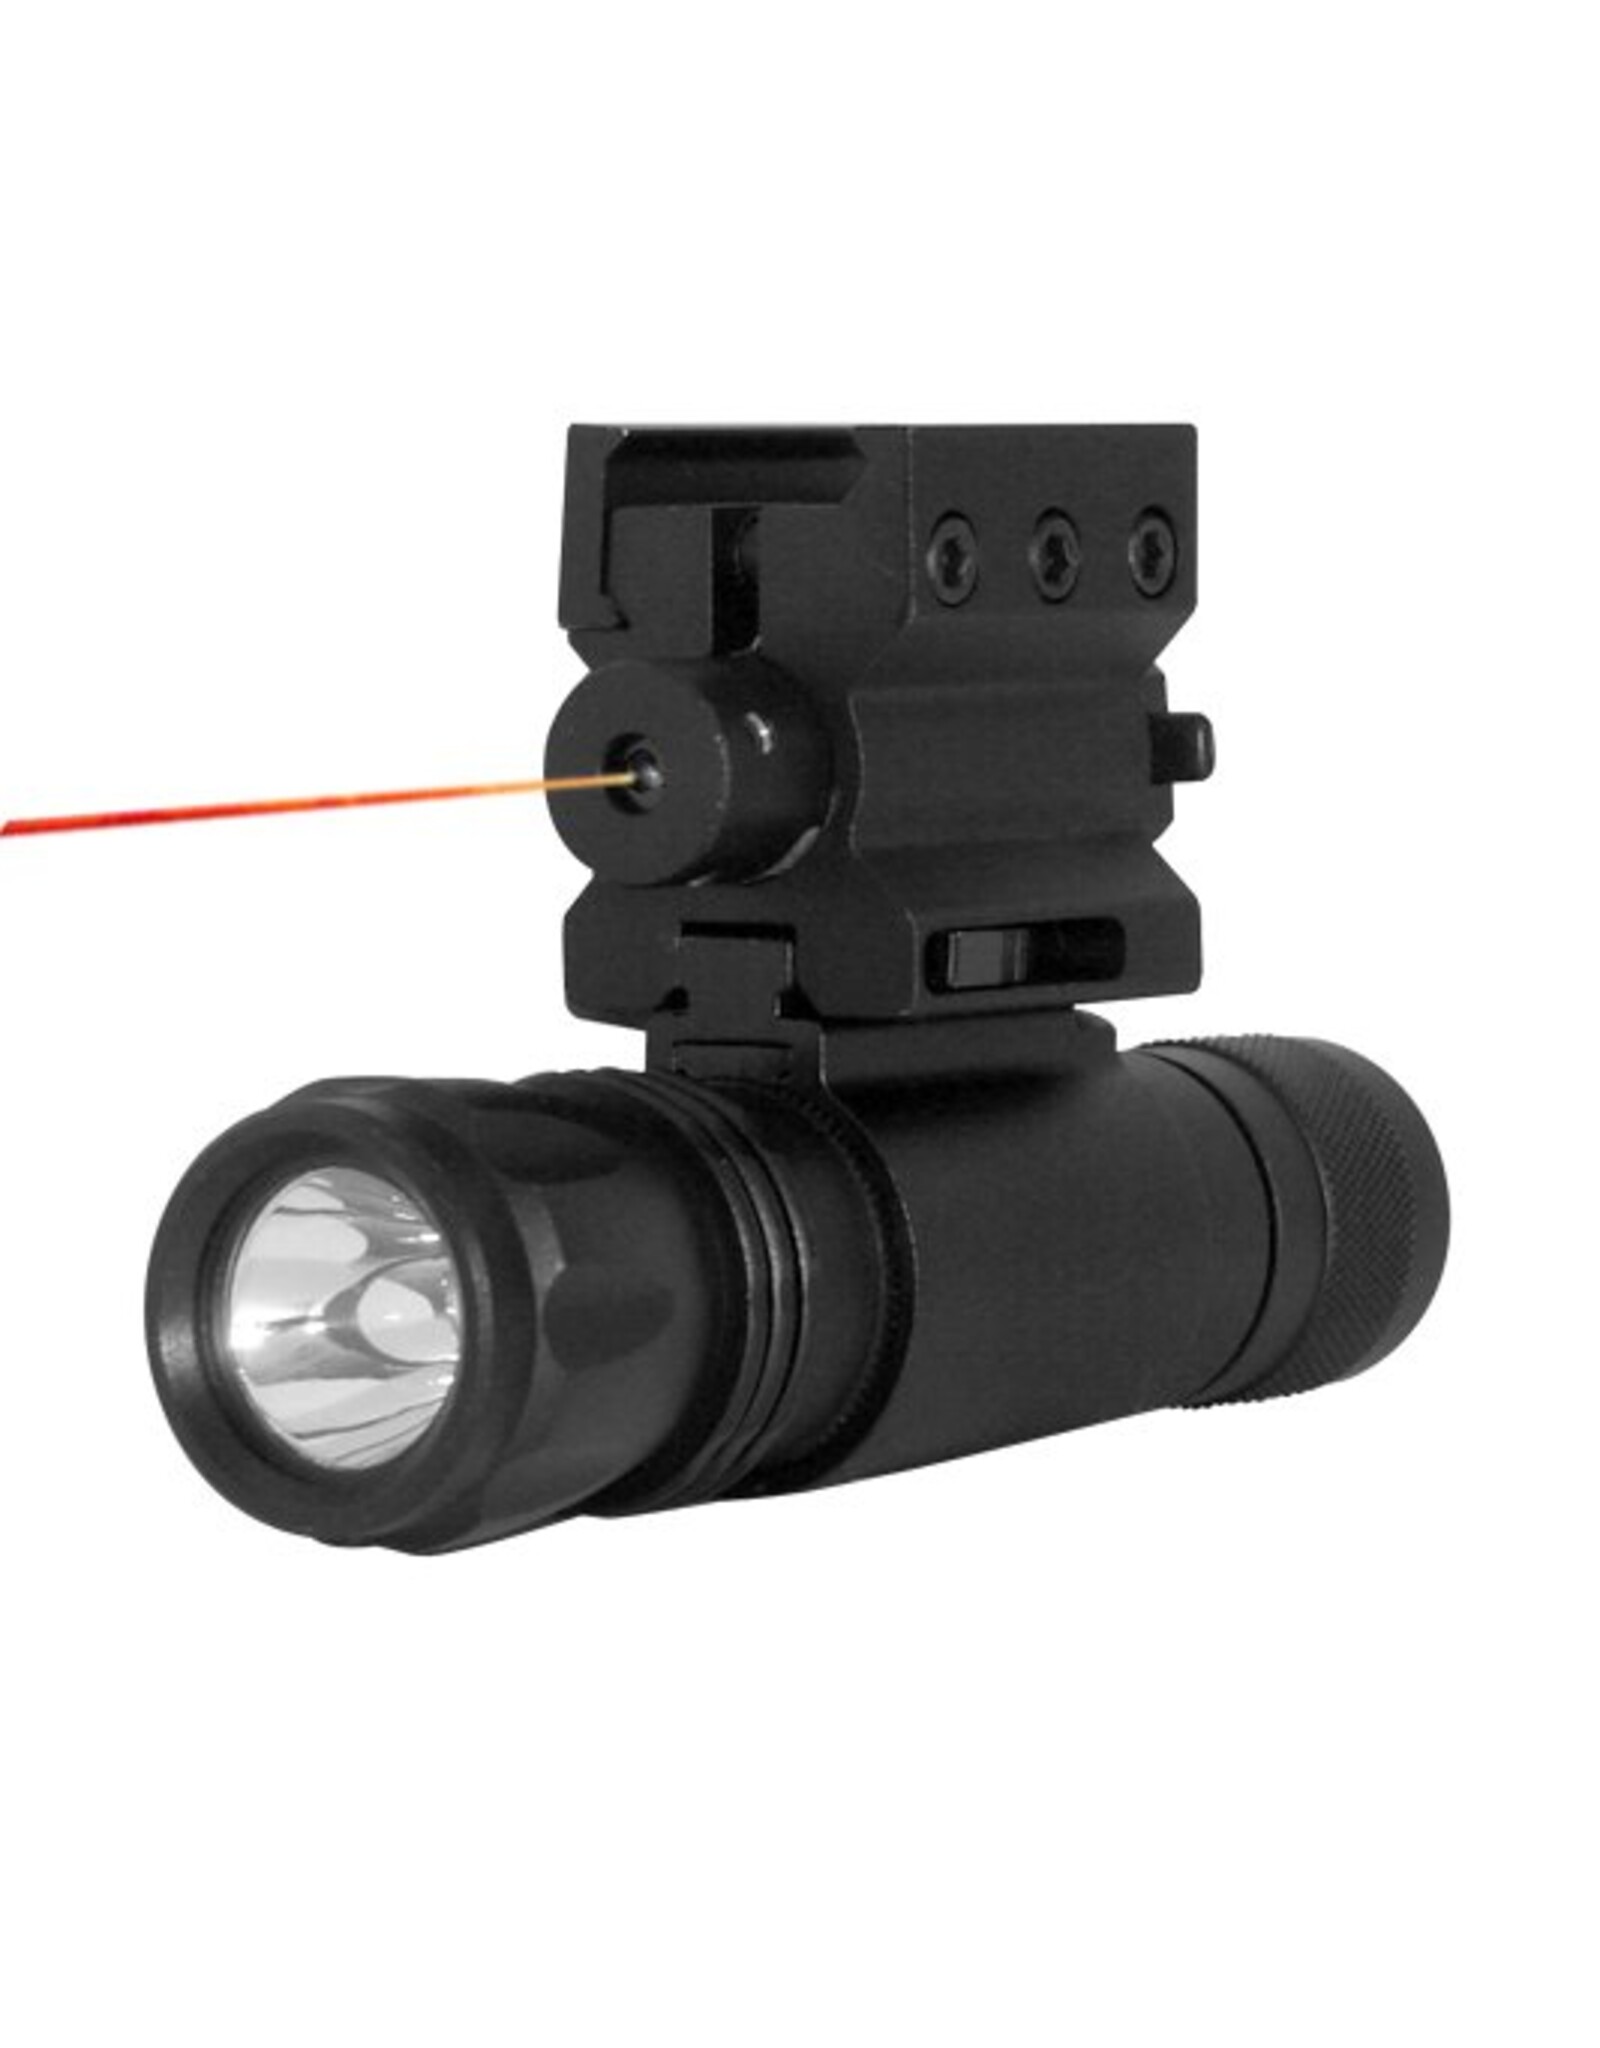 NcStar Red laser sight with weaver mount & LED flashlight with quich release combo